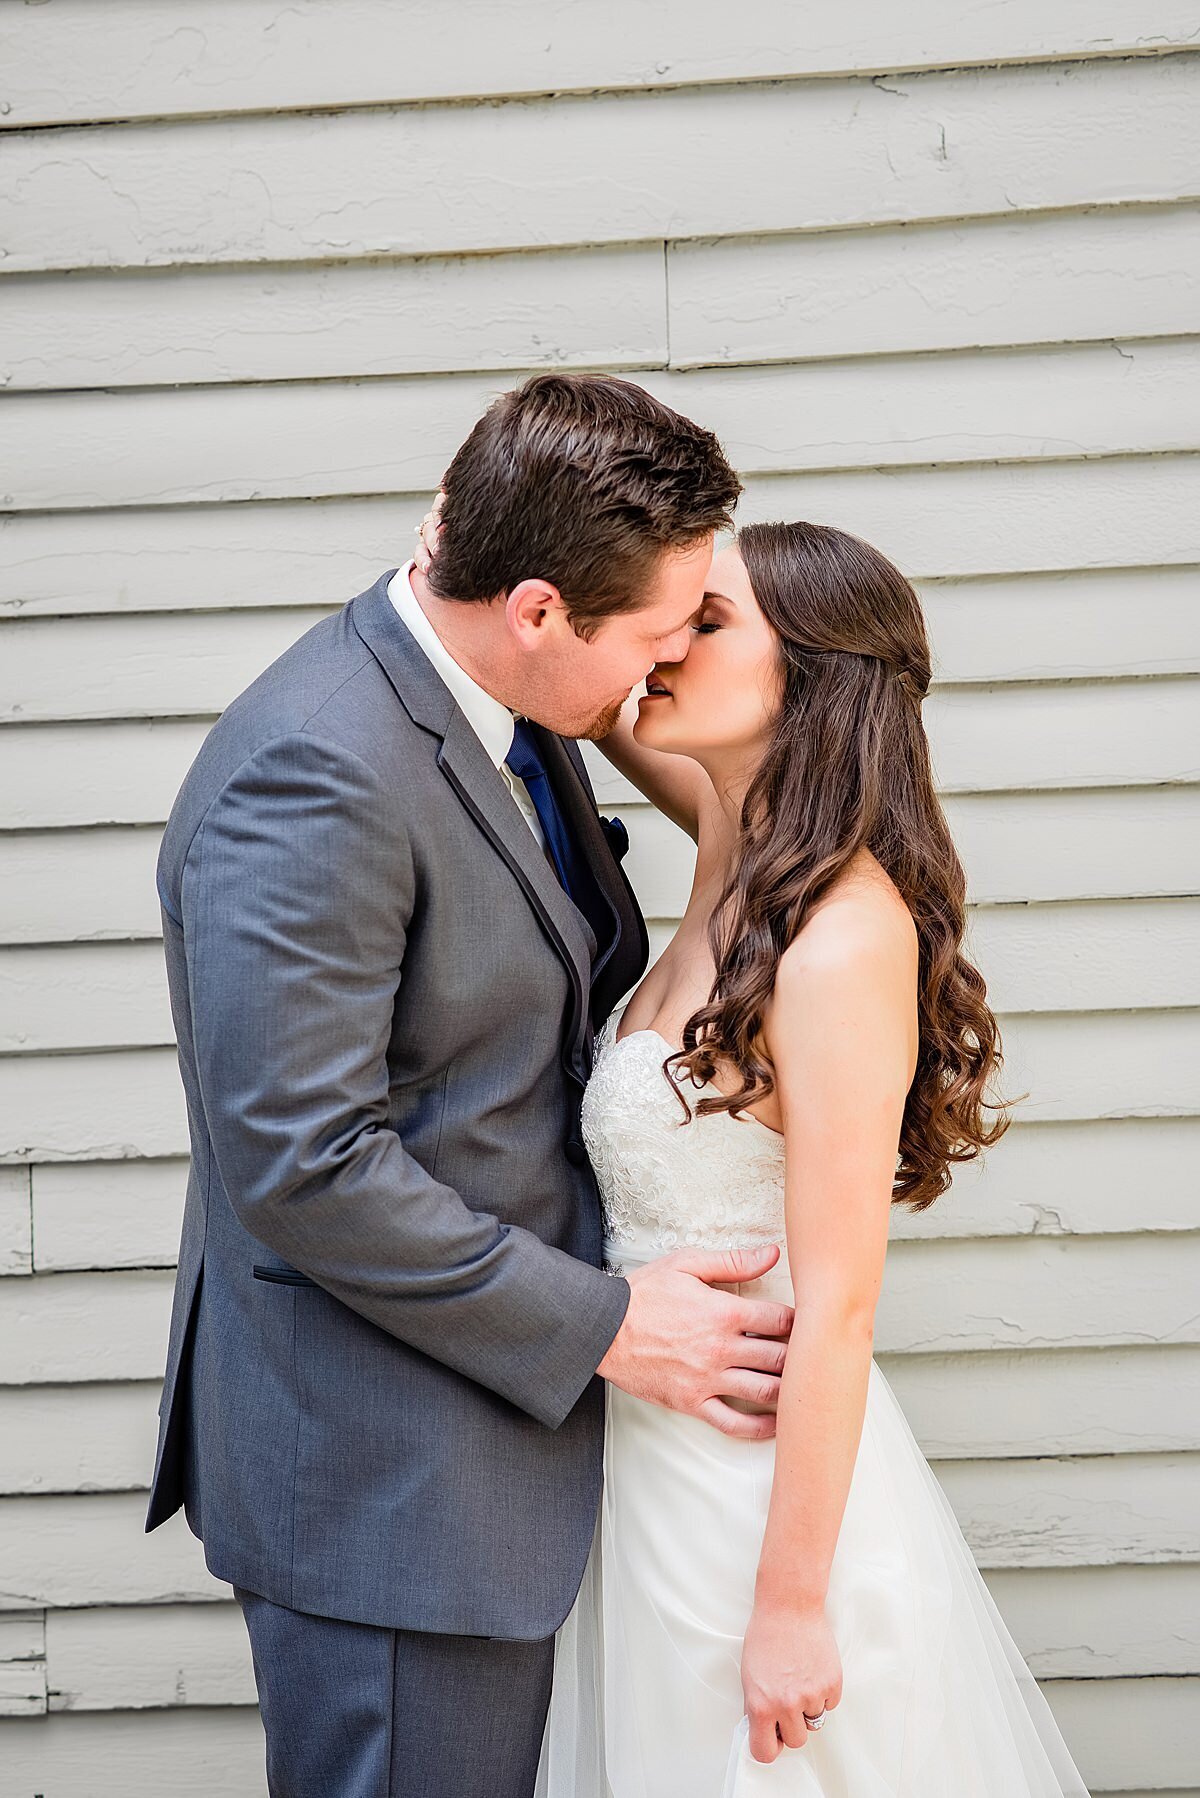 Bride and groom getting ready to share a kiss in front of historic wood barn